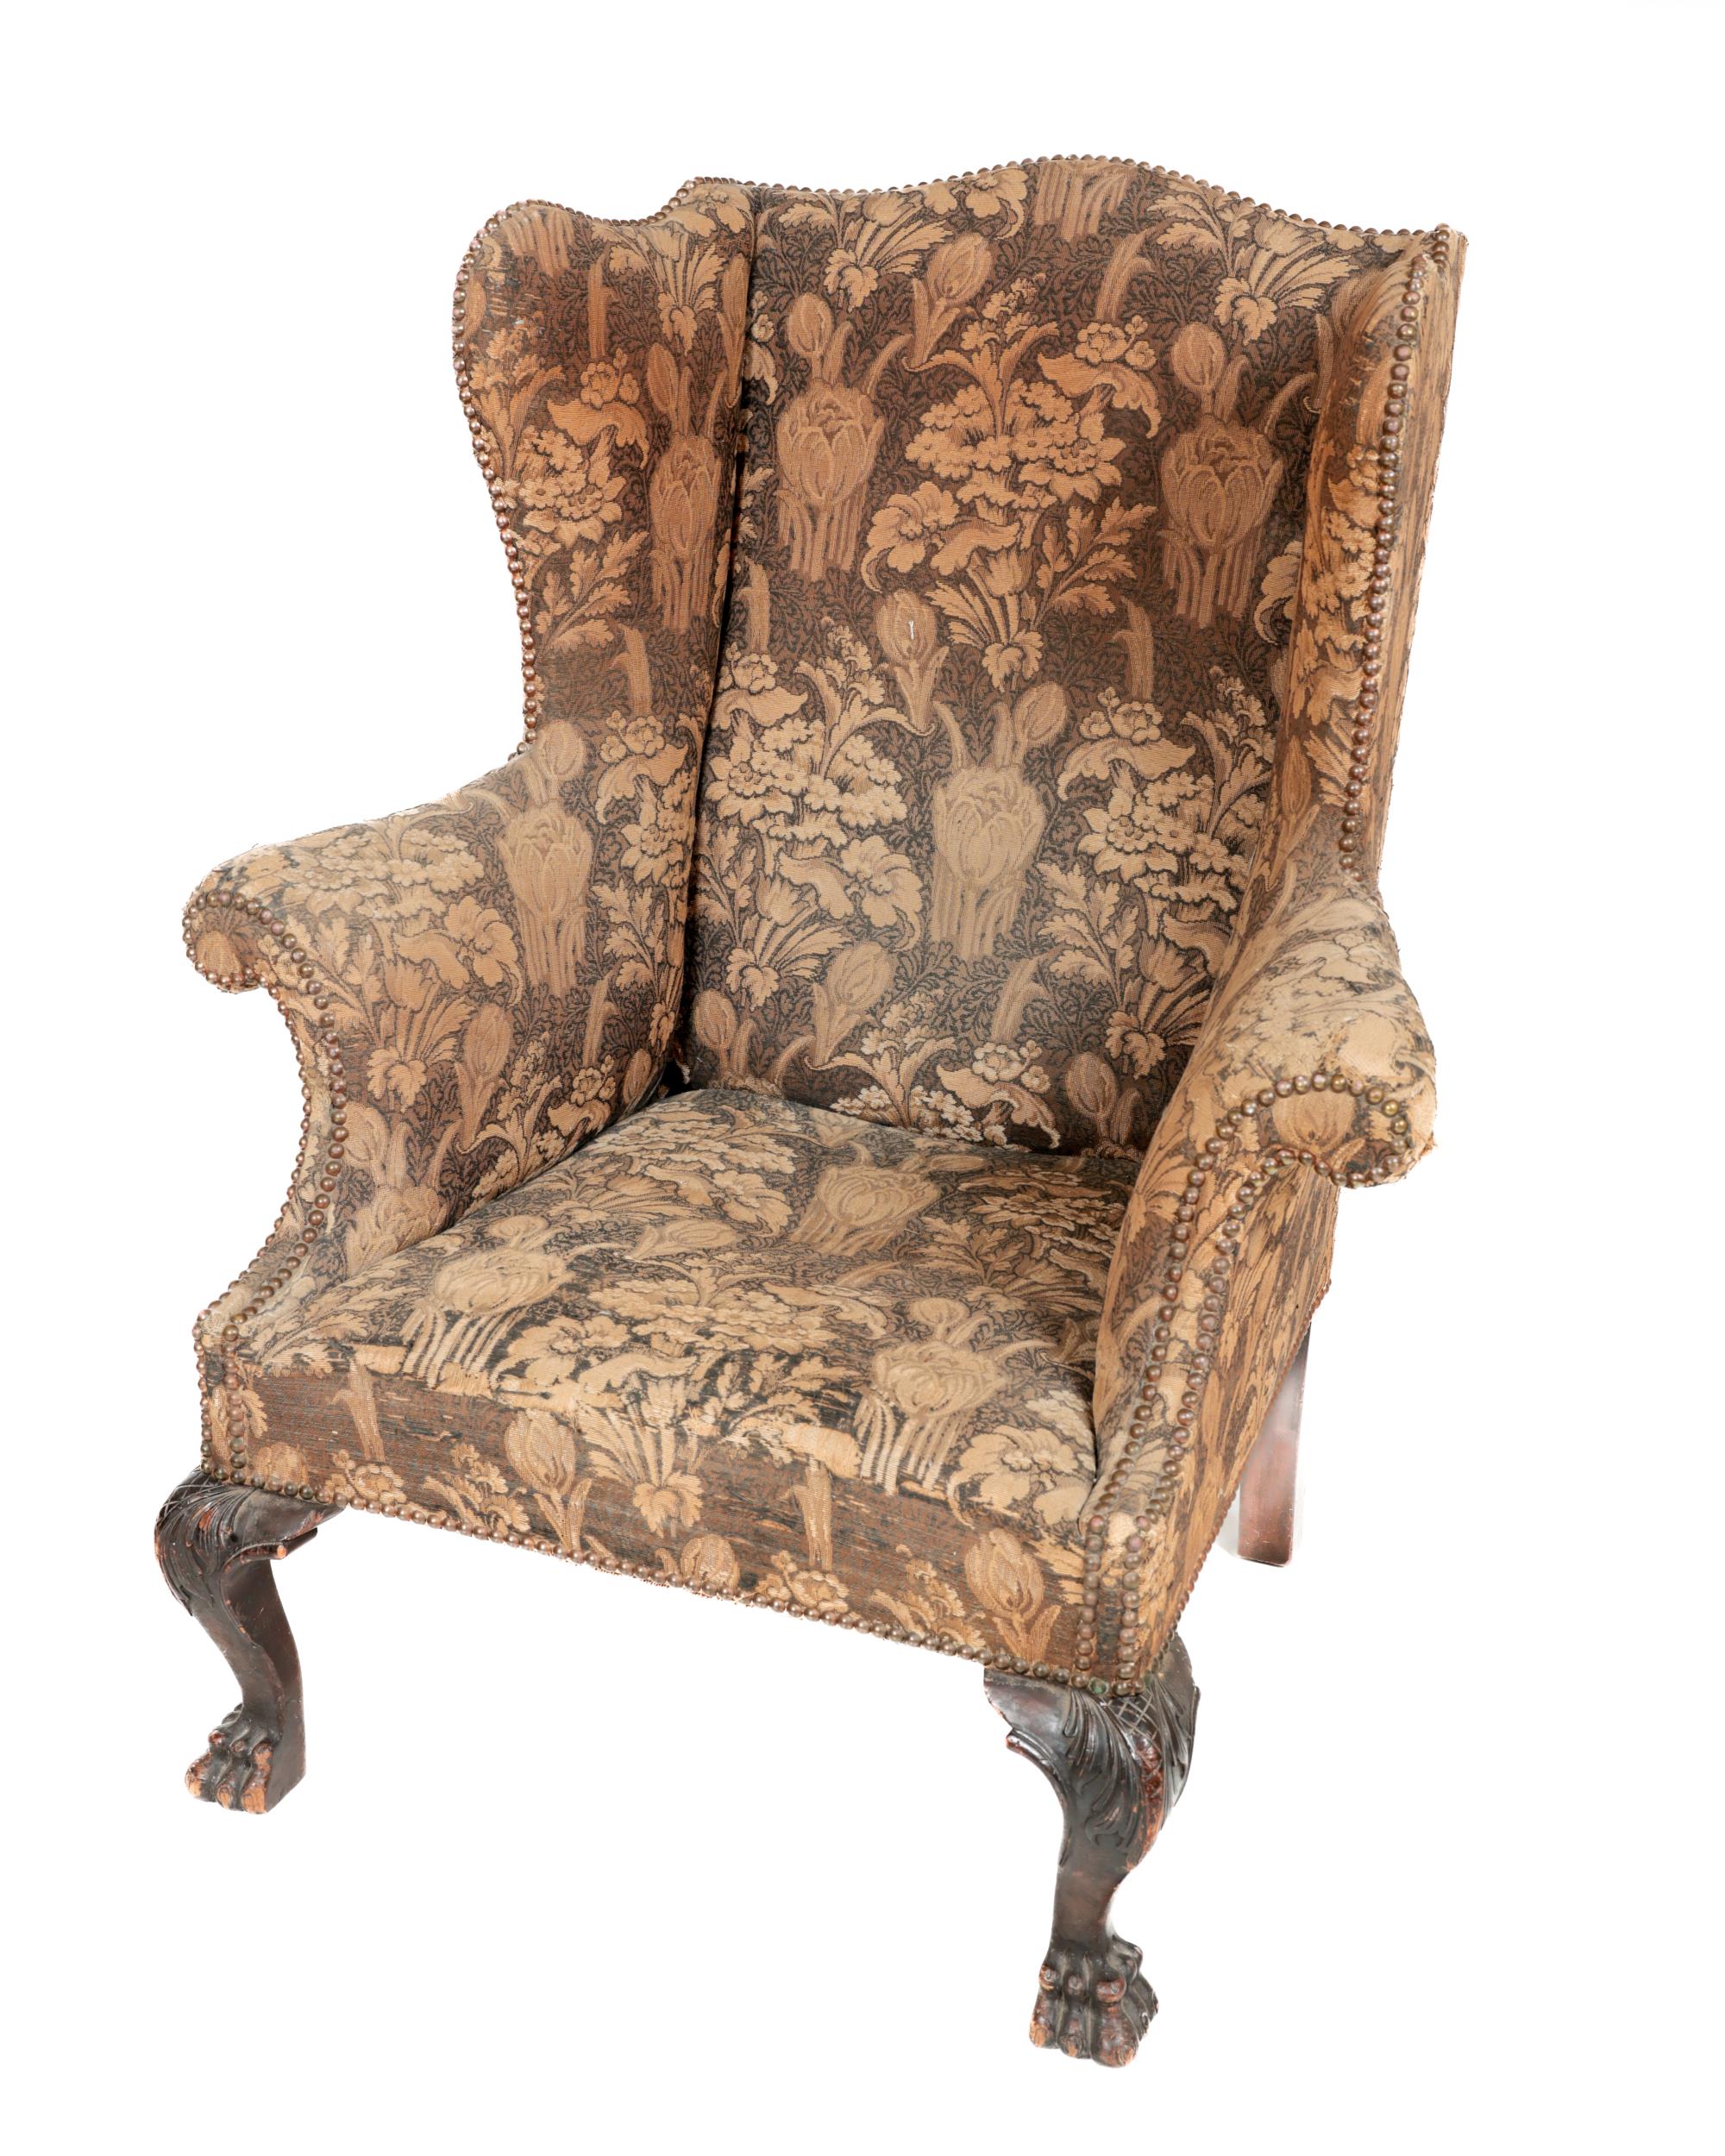 A 19th Century Irish mahogany Georgian style wing-back Armchair, attributed to Butler of Dublin,